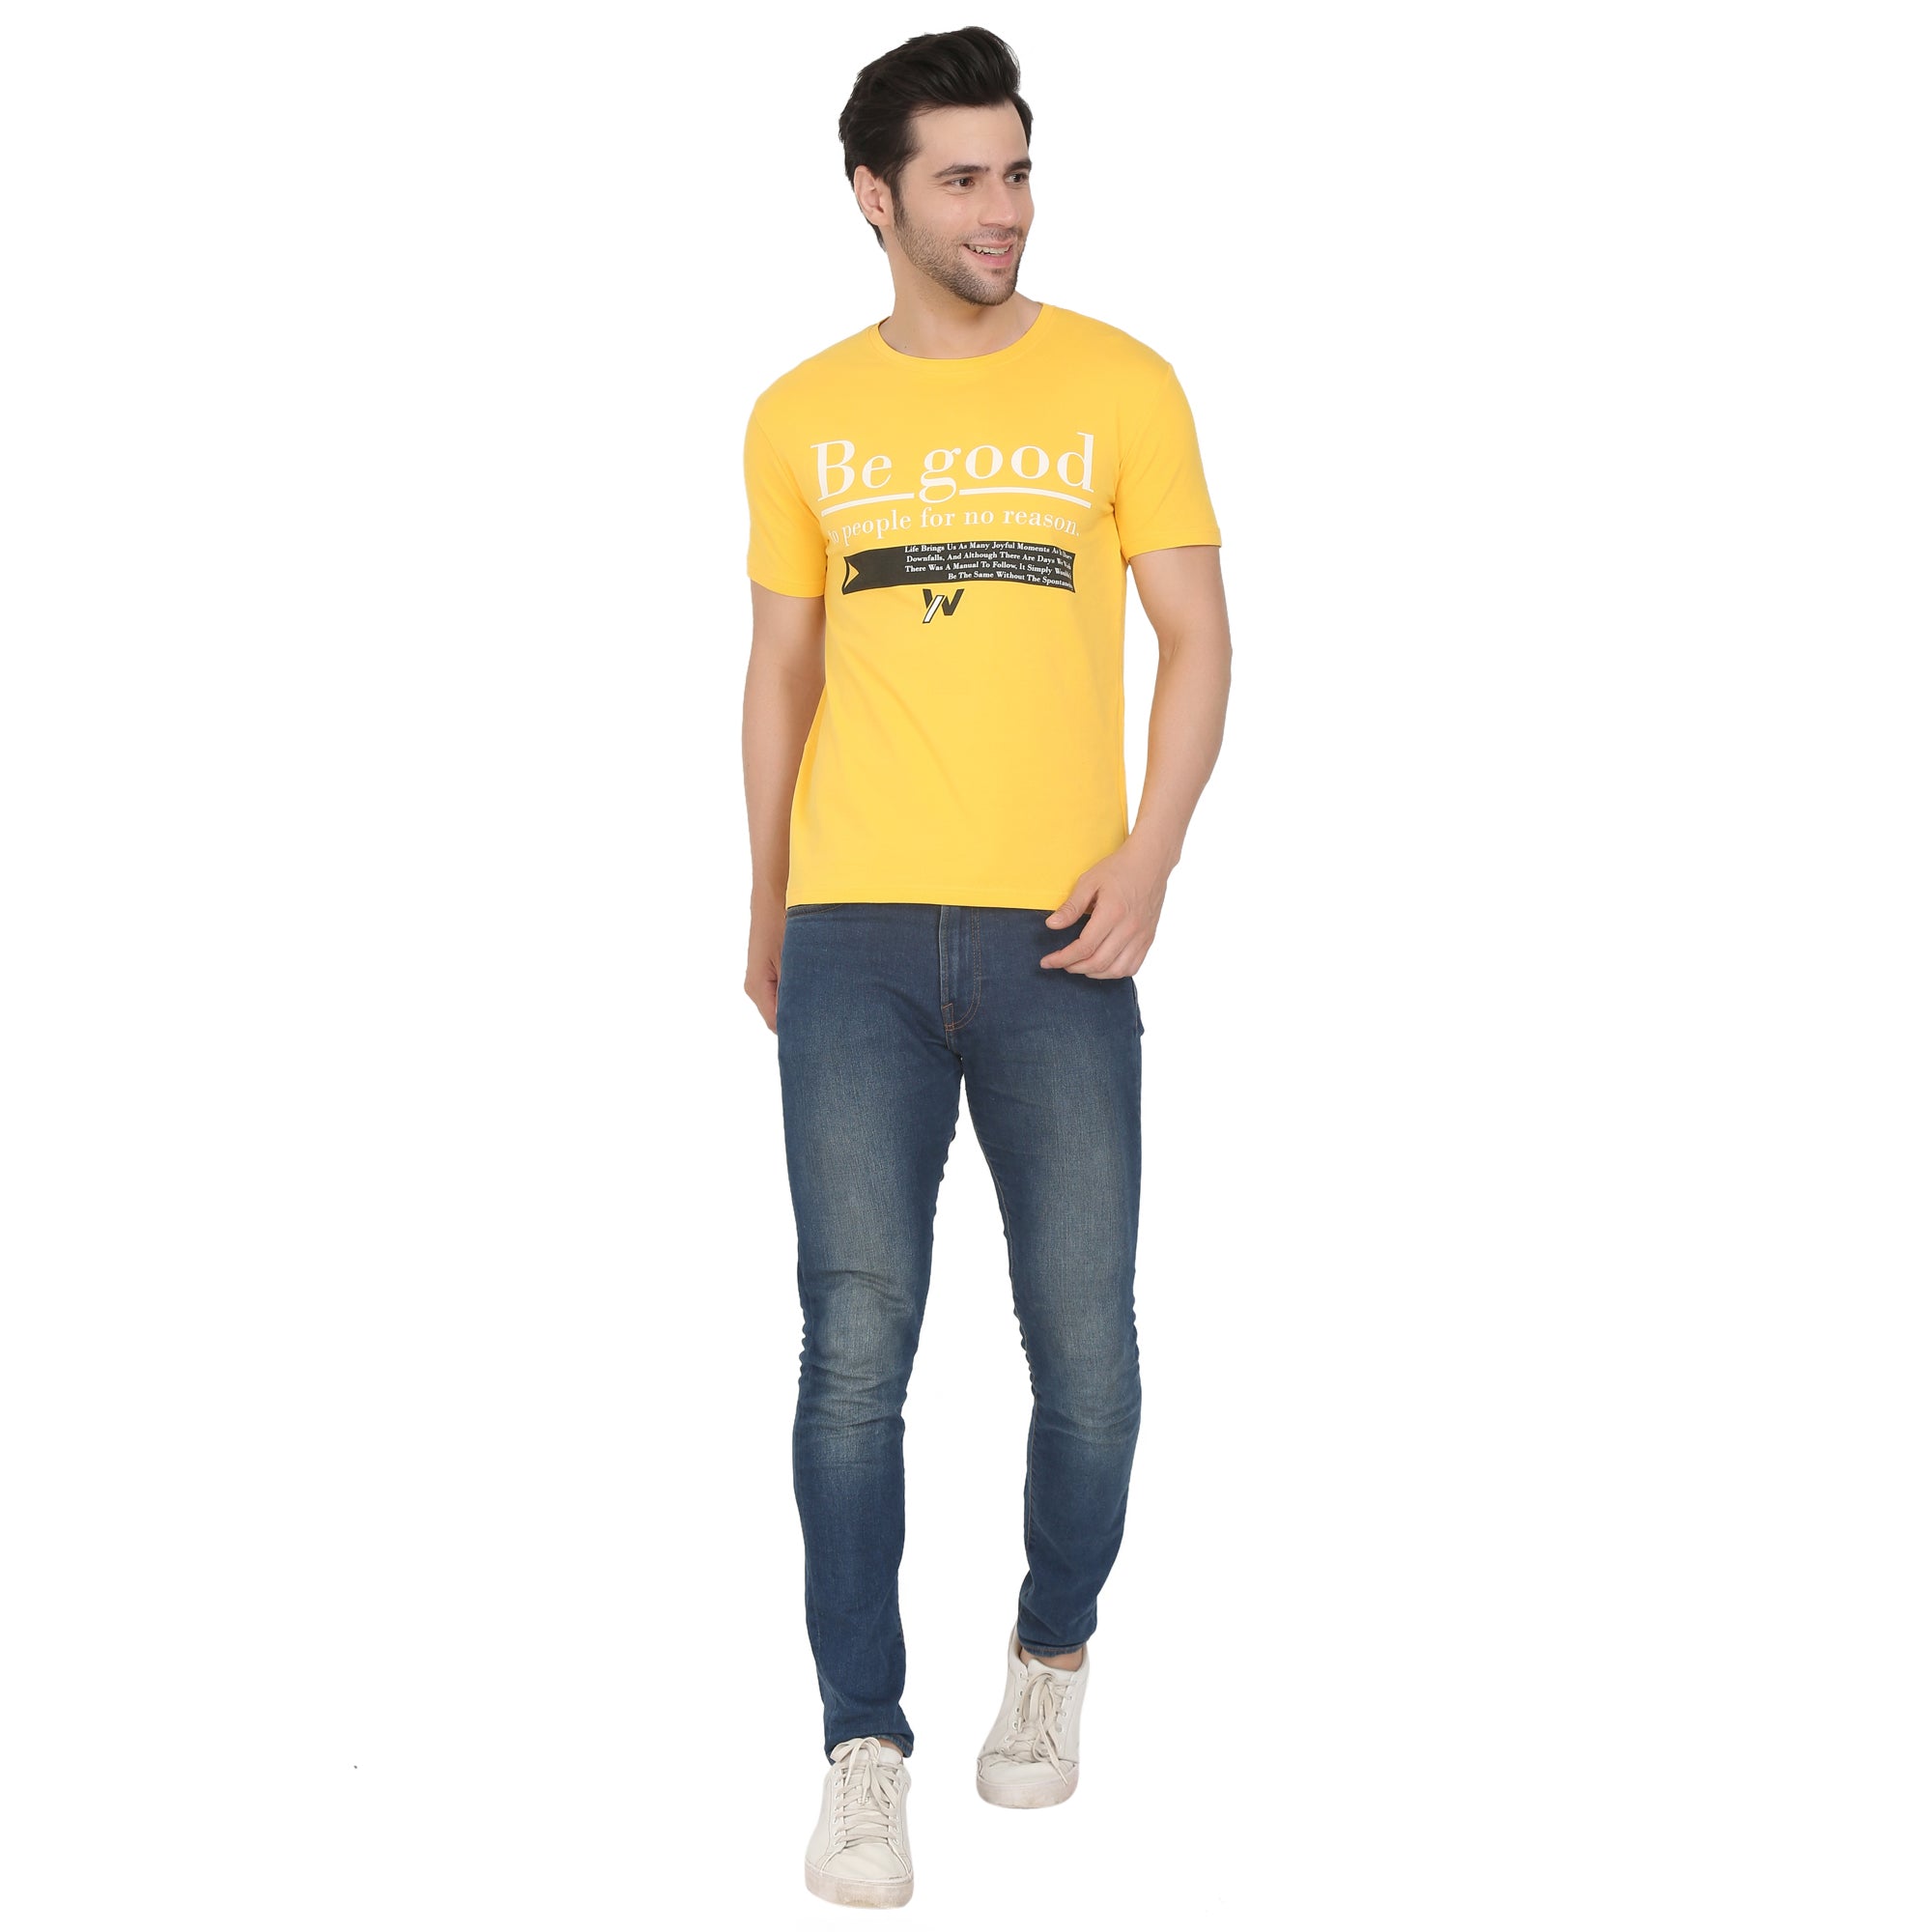 Men Four Way Stretch Cool Cotton Printed T-shirt - Yellow Colour